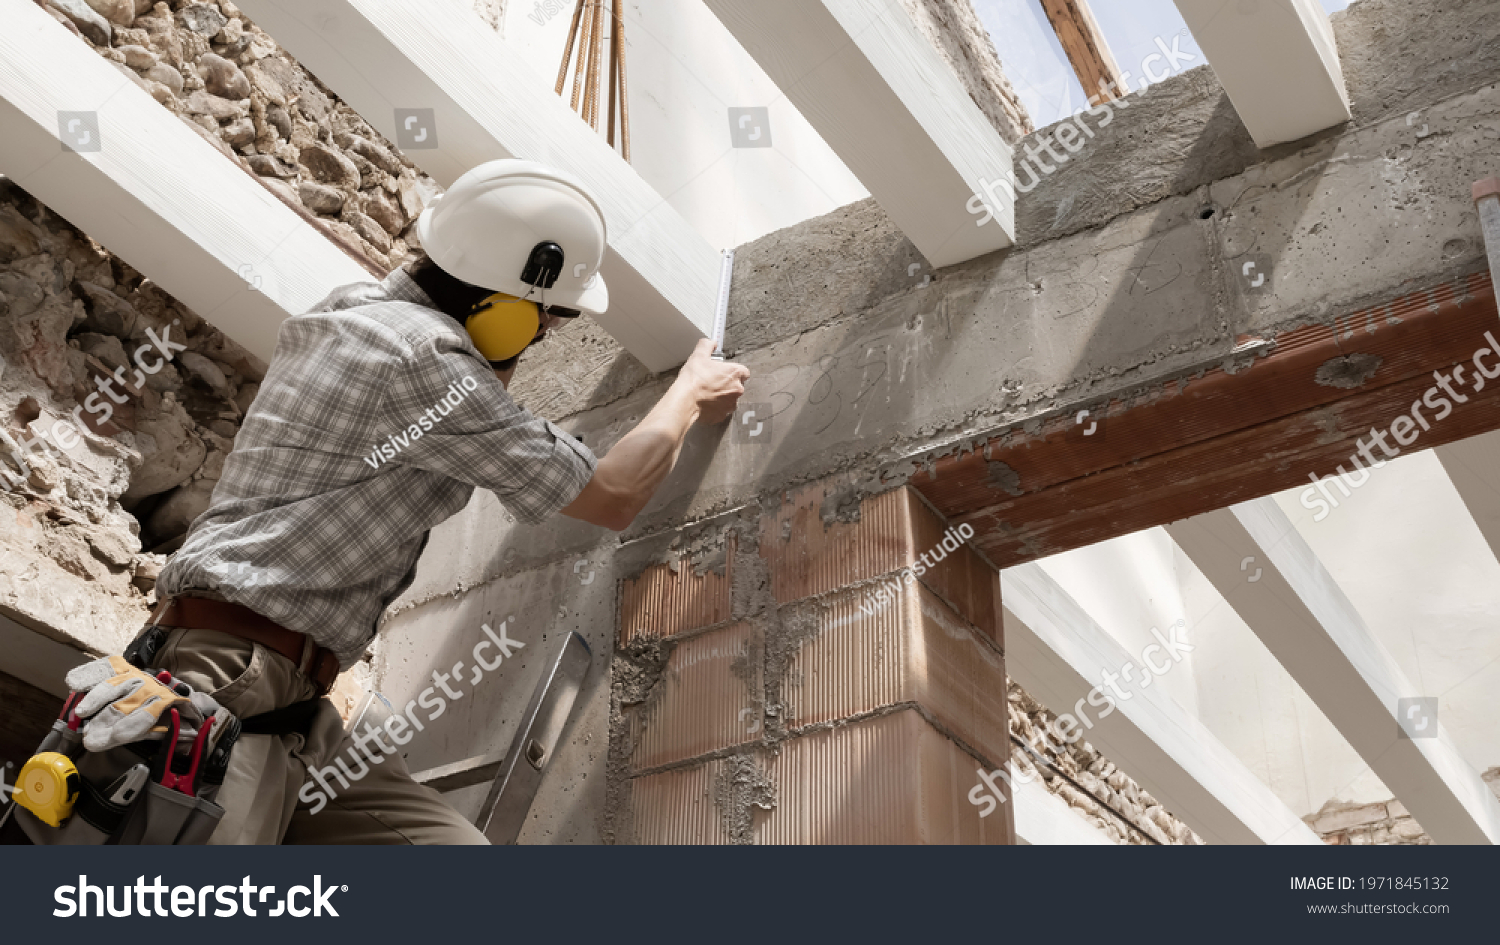 man at work, construction worker wear a helmet, check the measurements and distances of the beams at the base of the foundations of the second floor of house, in renovation building site background #1971845132